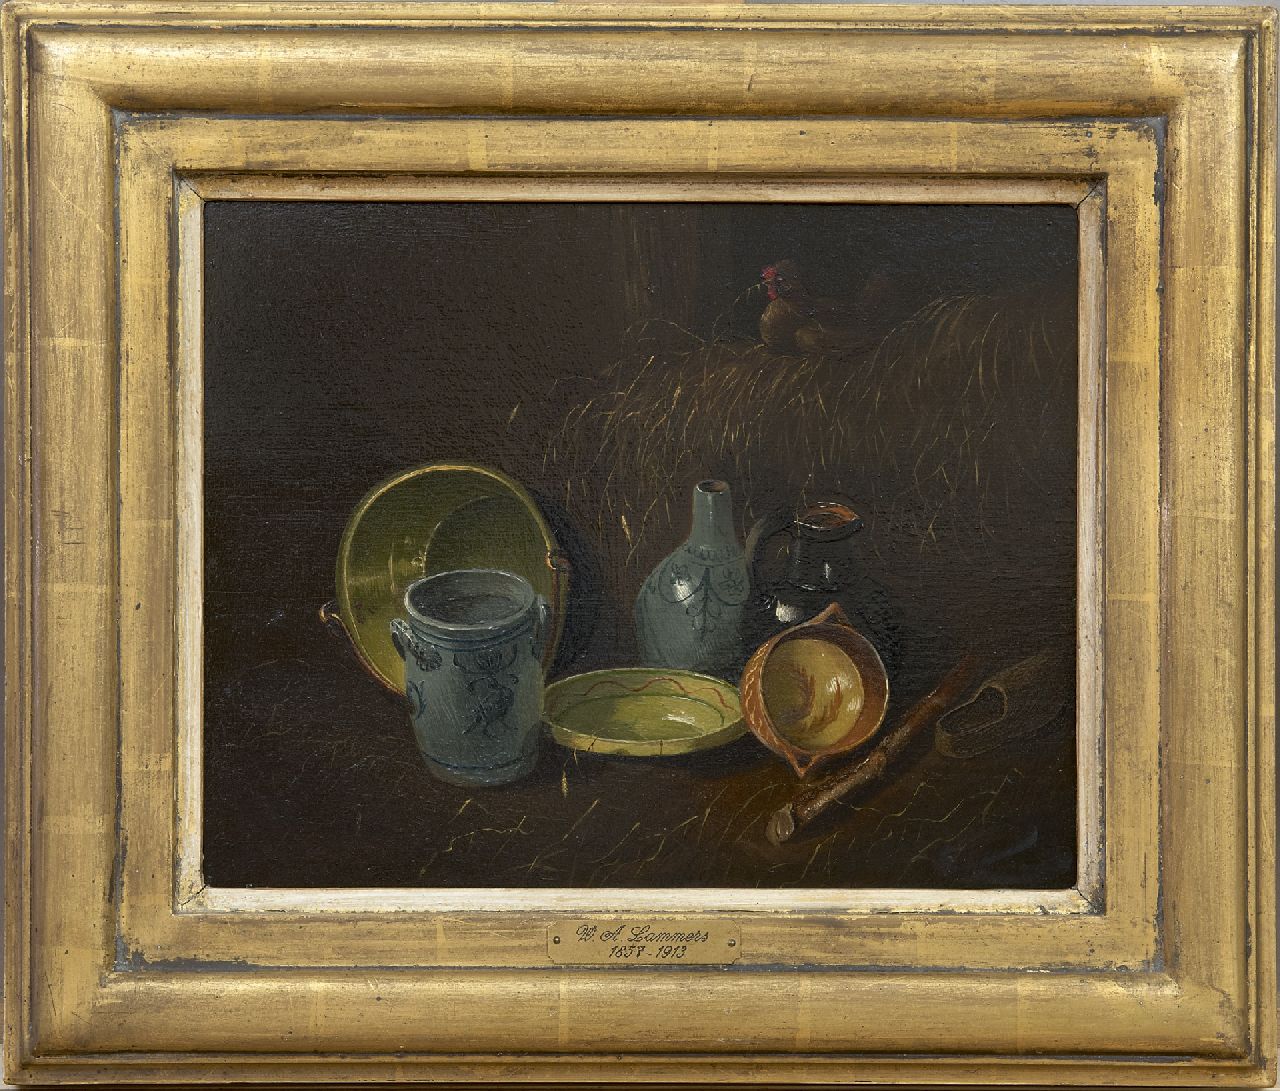 Lammers W.A.  | Wilhelm Albertus Lammers | Paintings offered for sale | A still life with kitchen attributes, oil on panel 22.4 x 28.3 cm